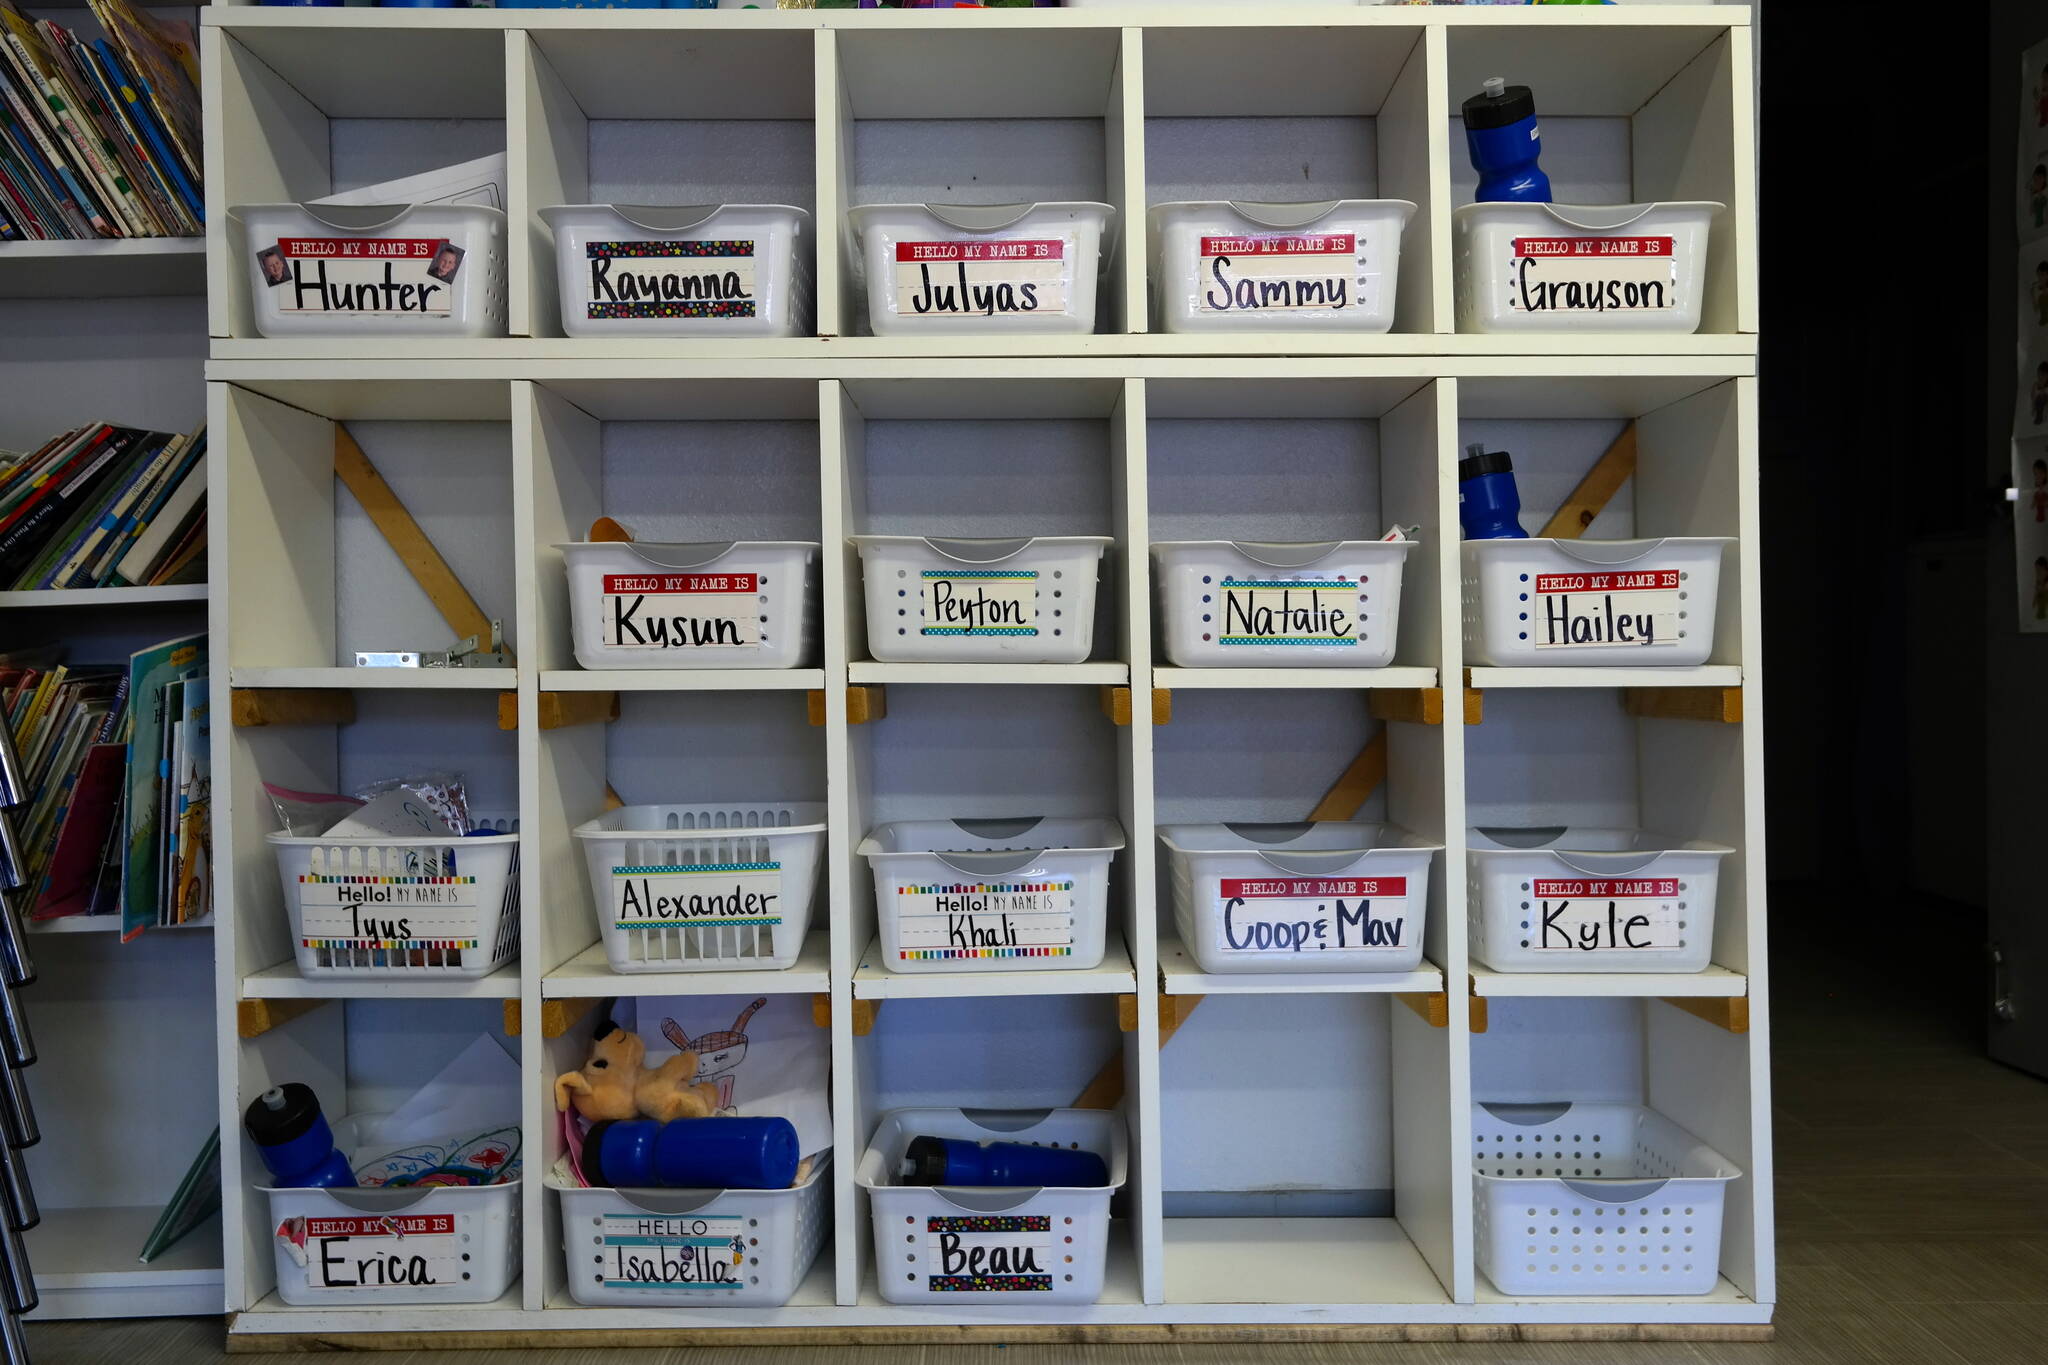 Student drawers in the “Ocean Room” at Tugboat Granny’s Childcare and Preschool in Ocean Shores. In 2020, he child care center moved into a building on Ocean Shores Blvd. that is licensed for 36 children from 1-12 years-old. Last year, they added a site located in two classrooms at Ocean Shores Elementary to meet community needs for infant care. Erika Gebhardt I The Daily World